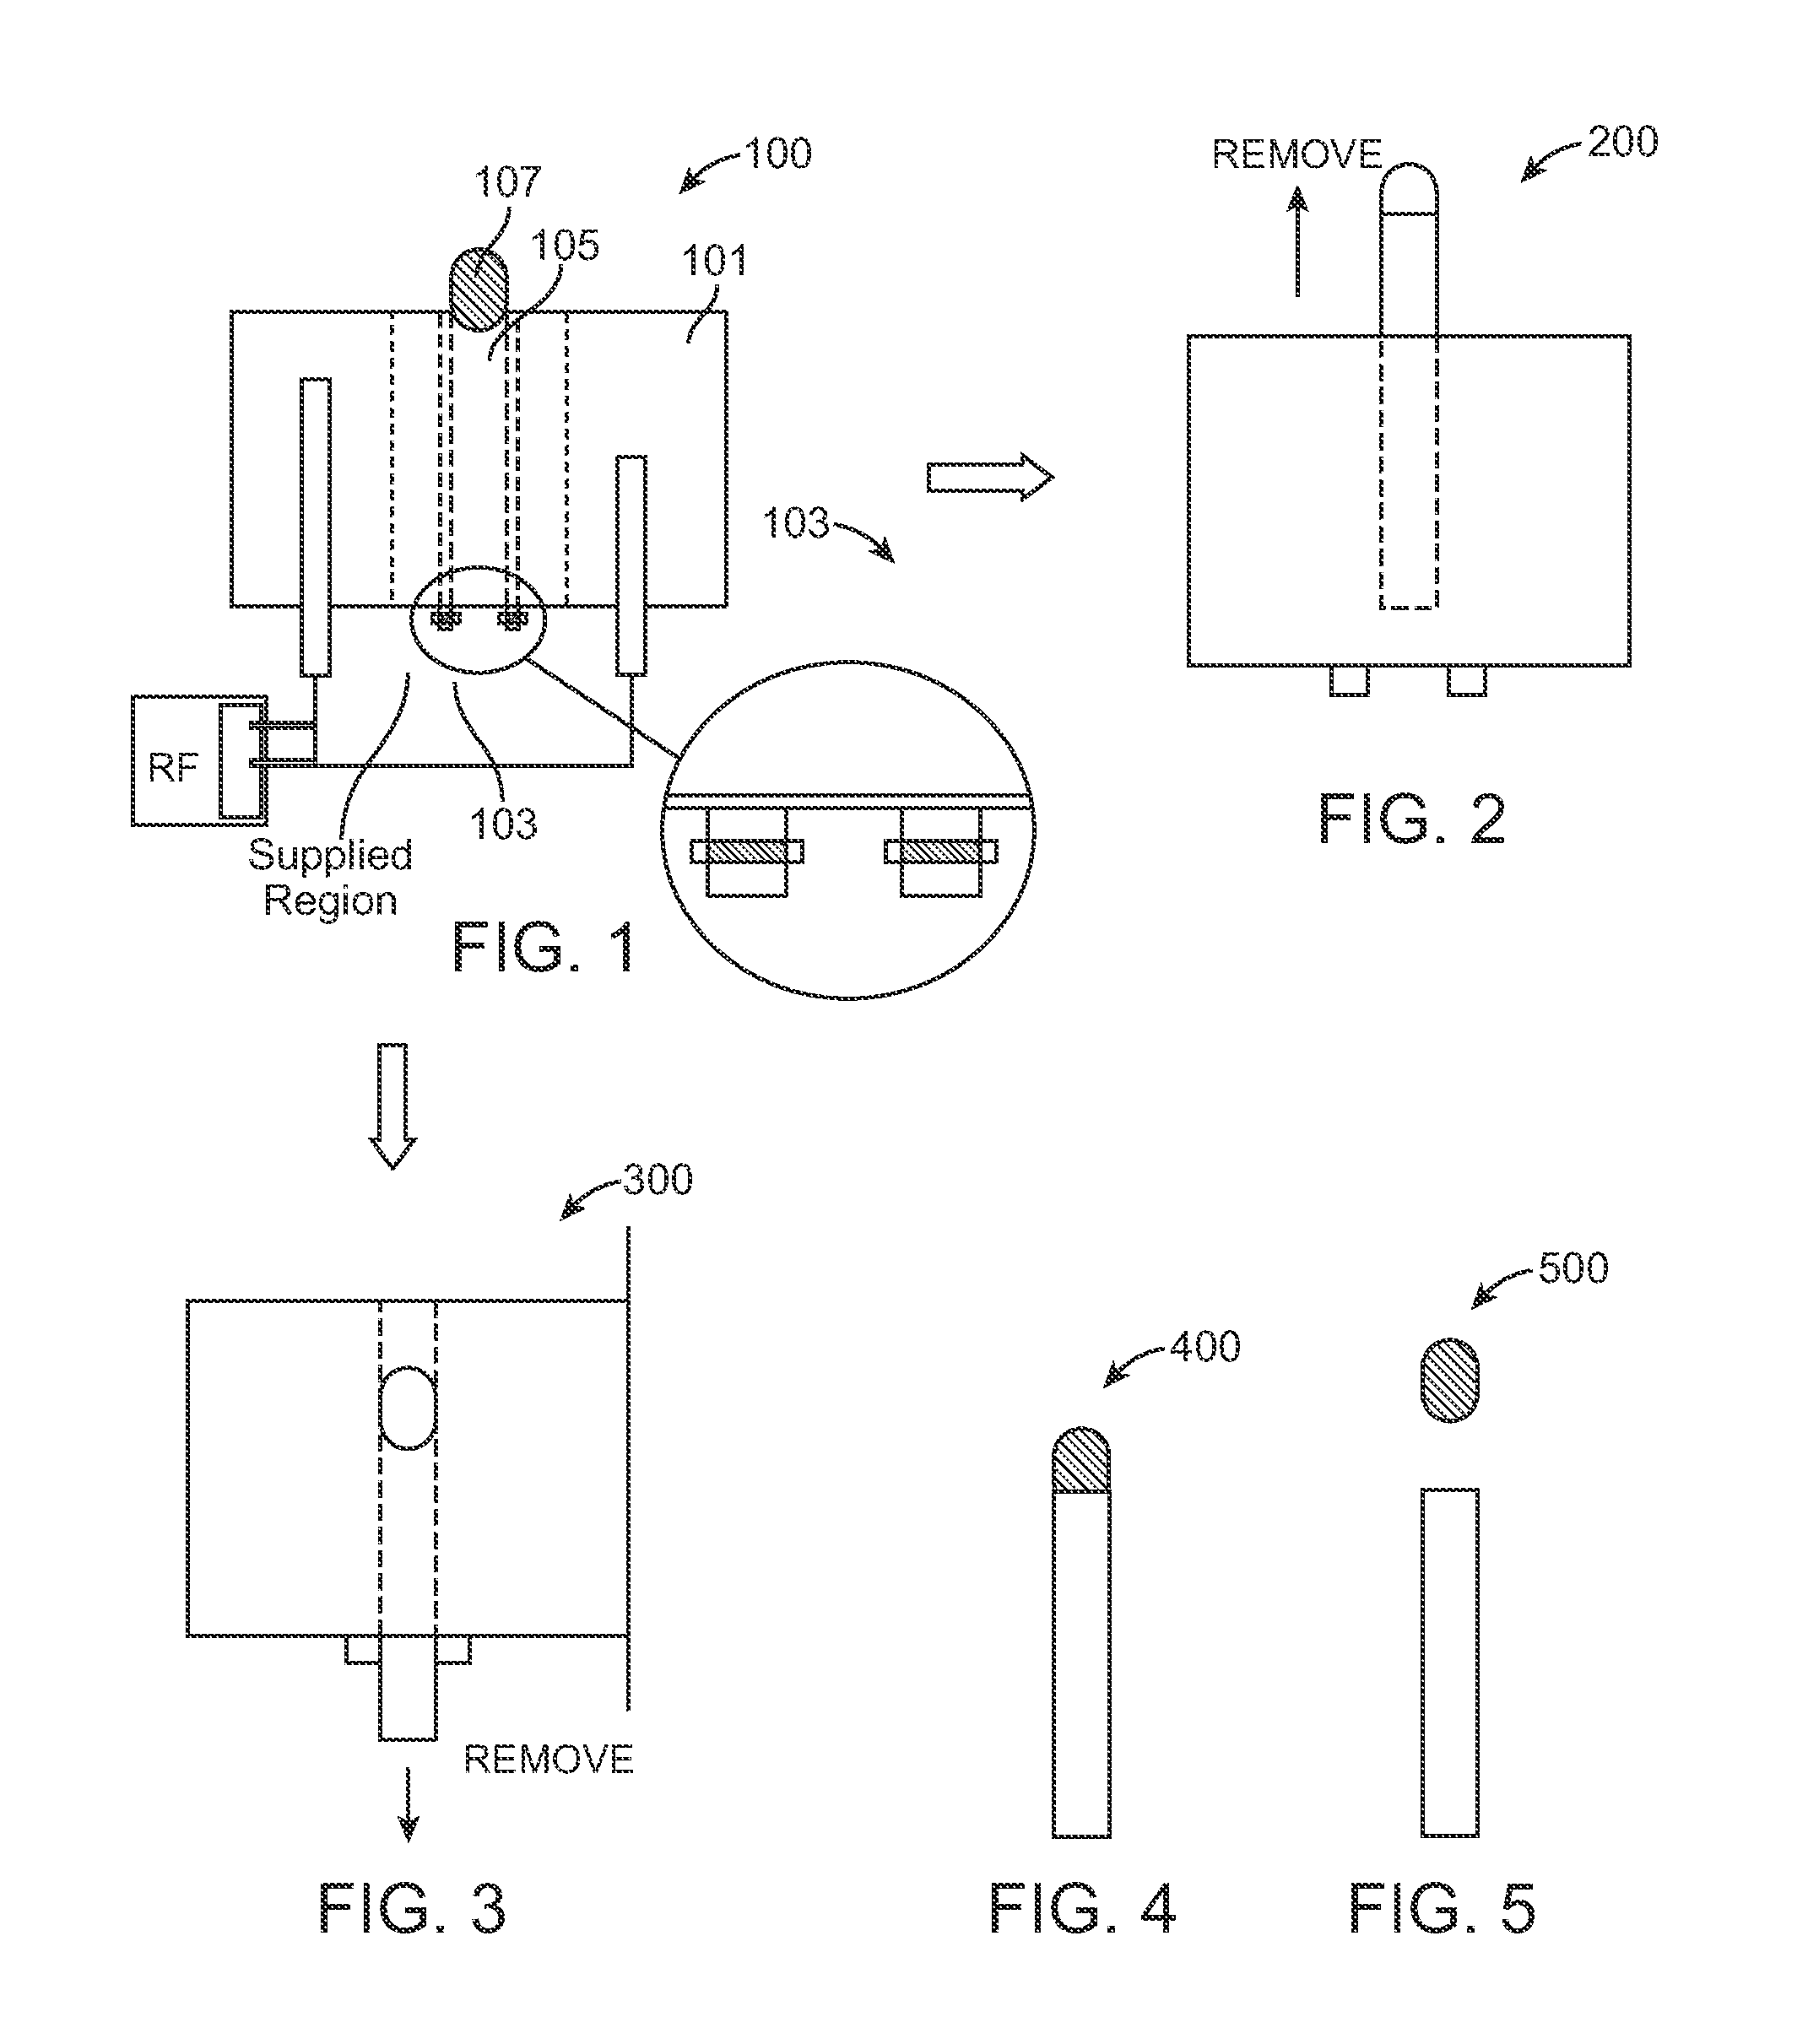 Method and system for replacing a plasma lamp from a resonator assembly